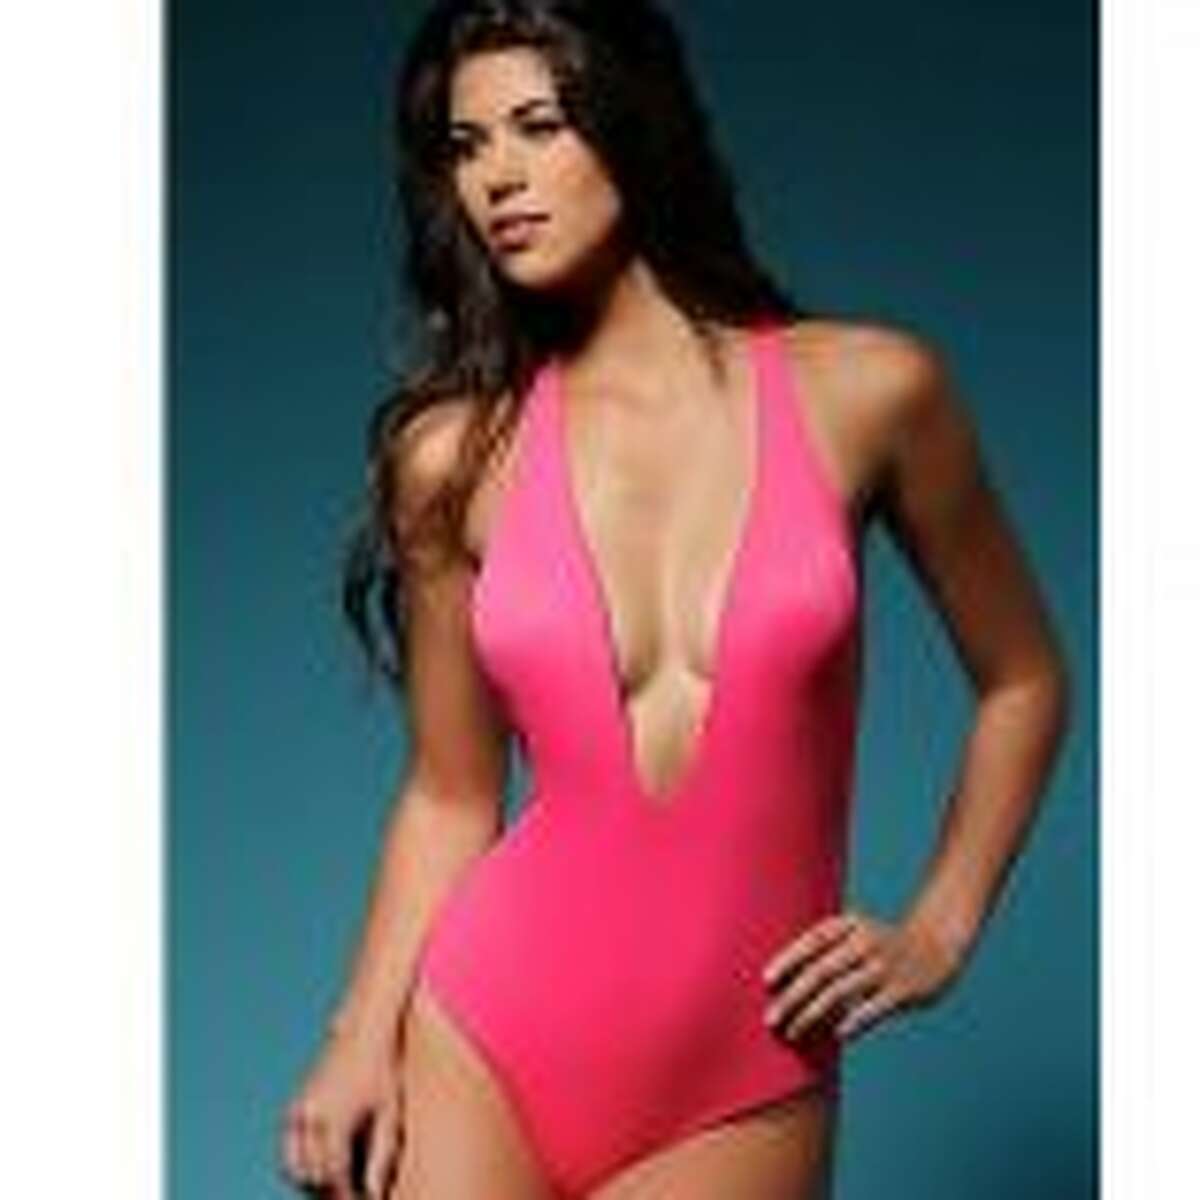 From the Besita Boutique website, the Peixoto pink Flamingo suit that Kate Upton modeled in Sports Illustrated.